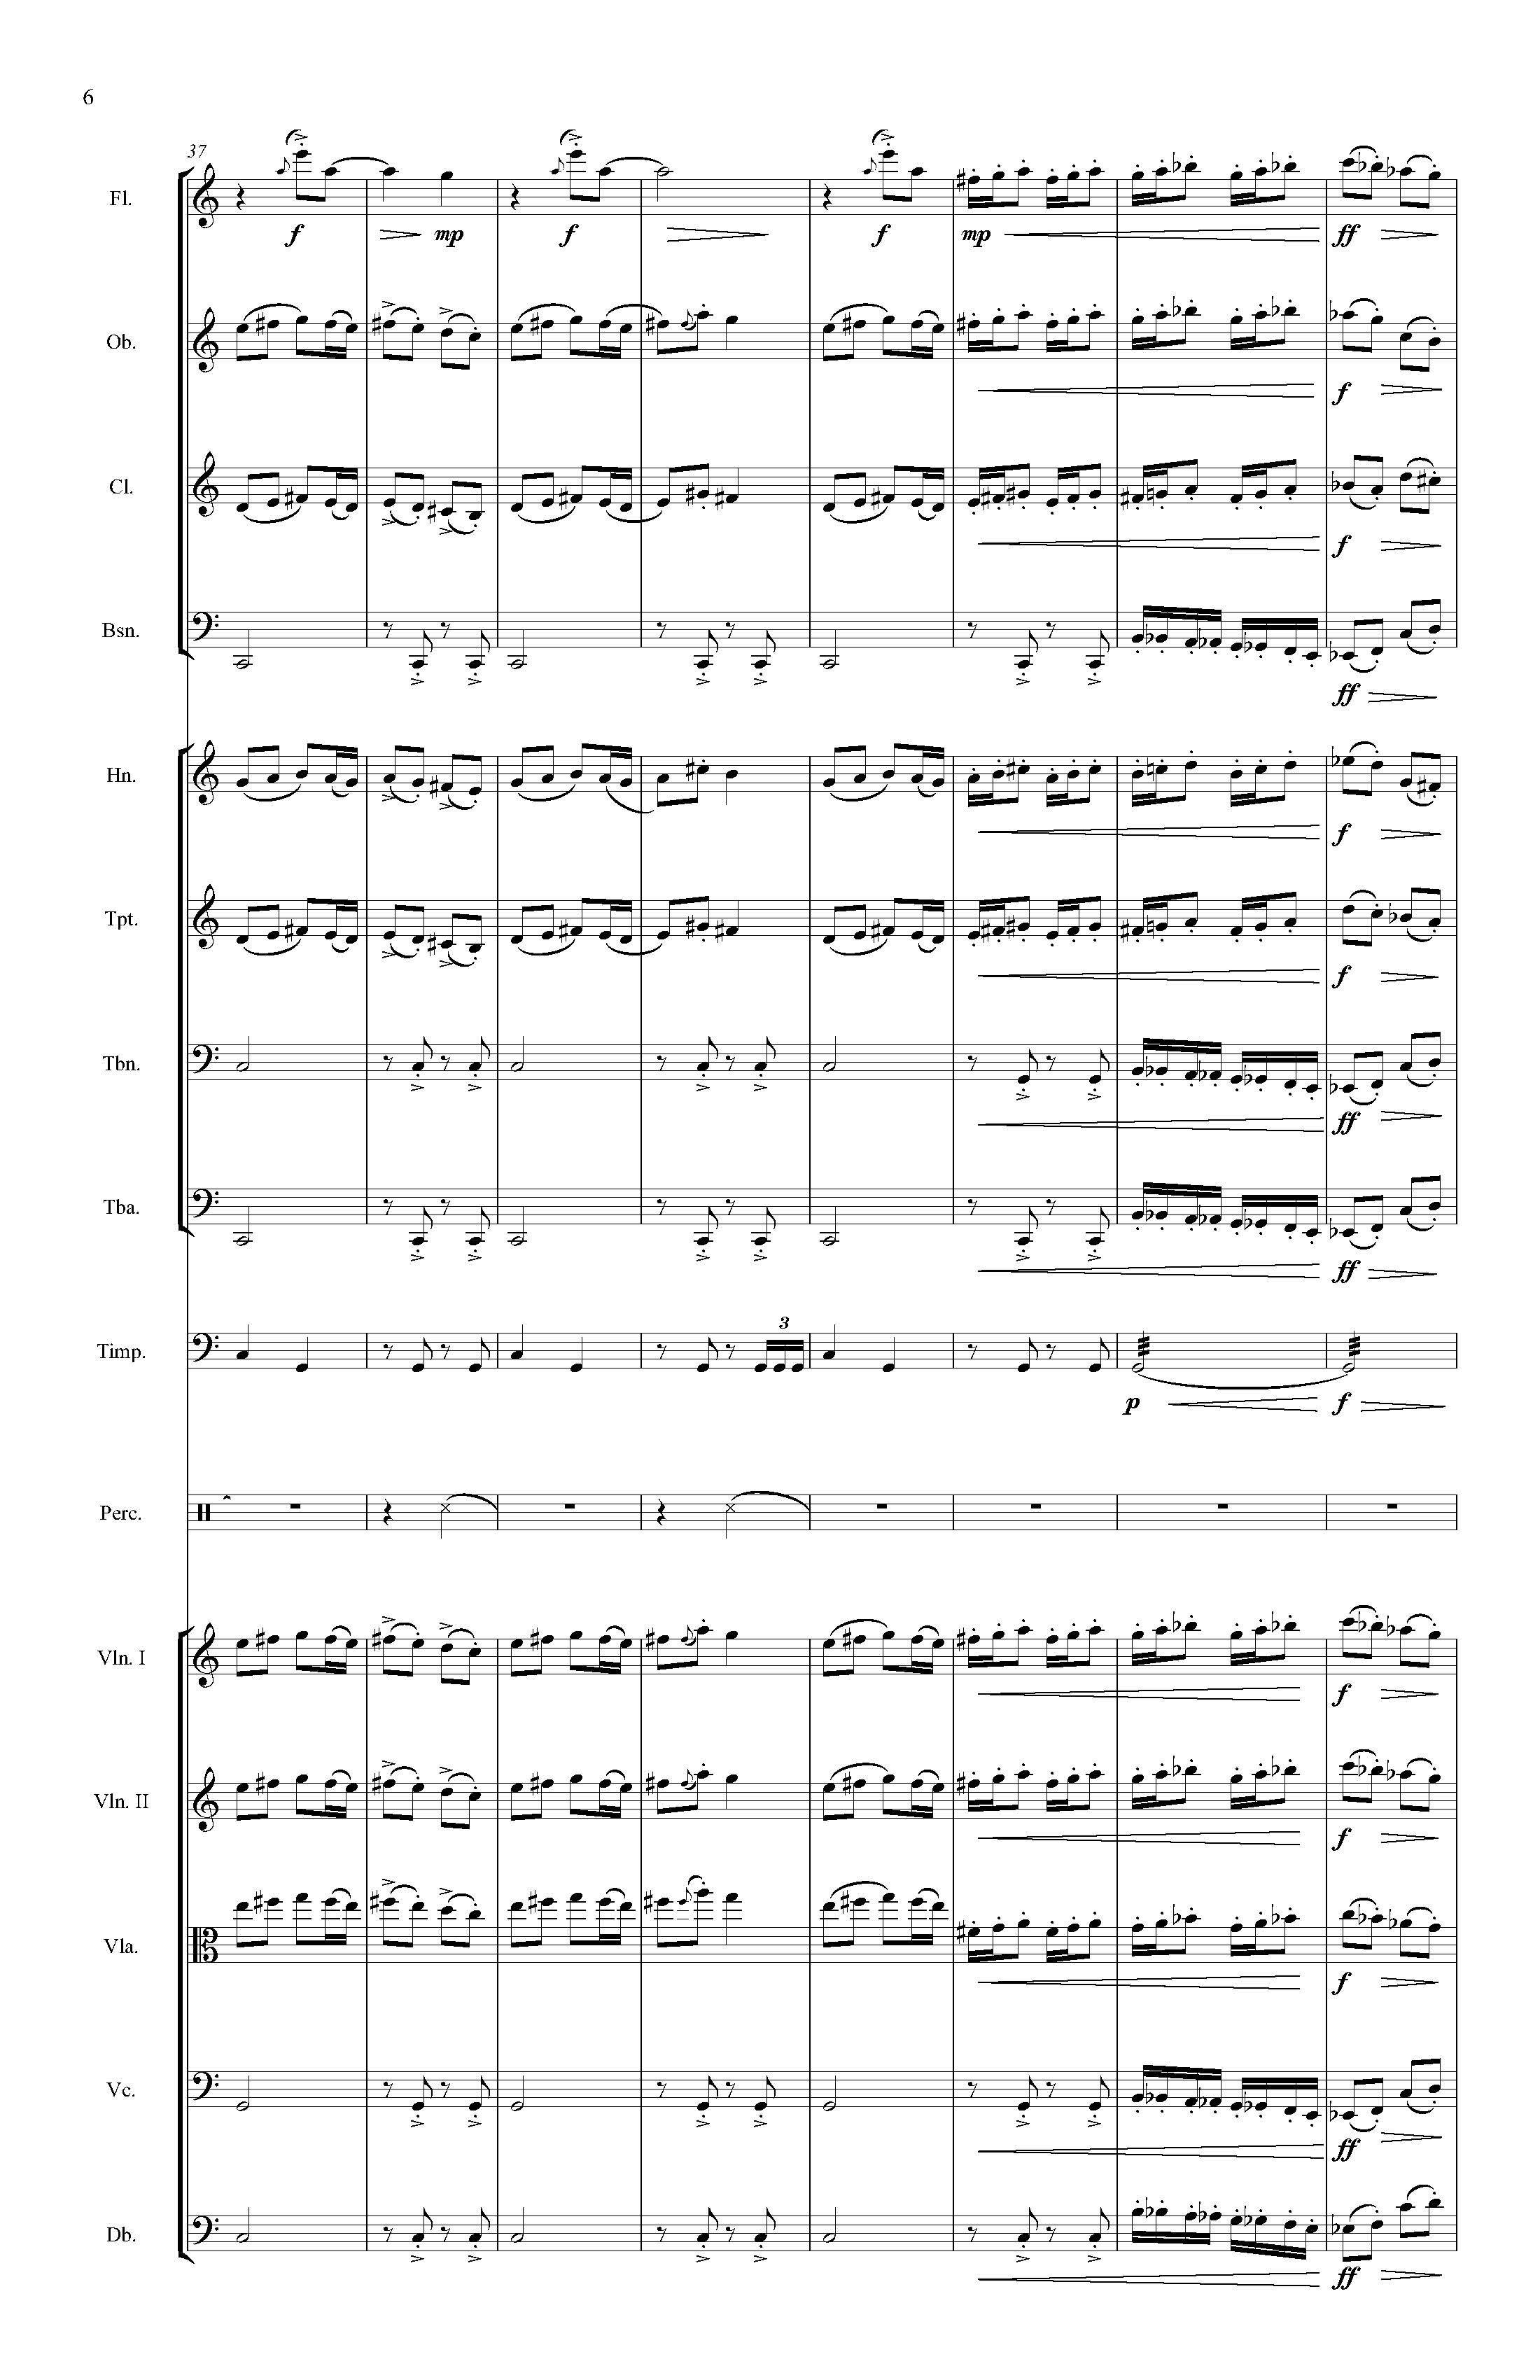 Fantasy on a French Carol - Complete Score_Page_10.jpg